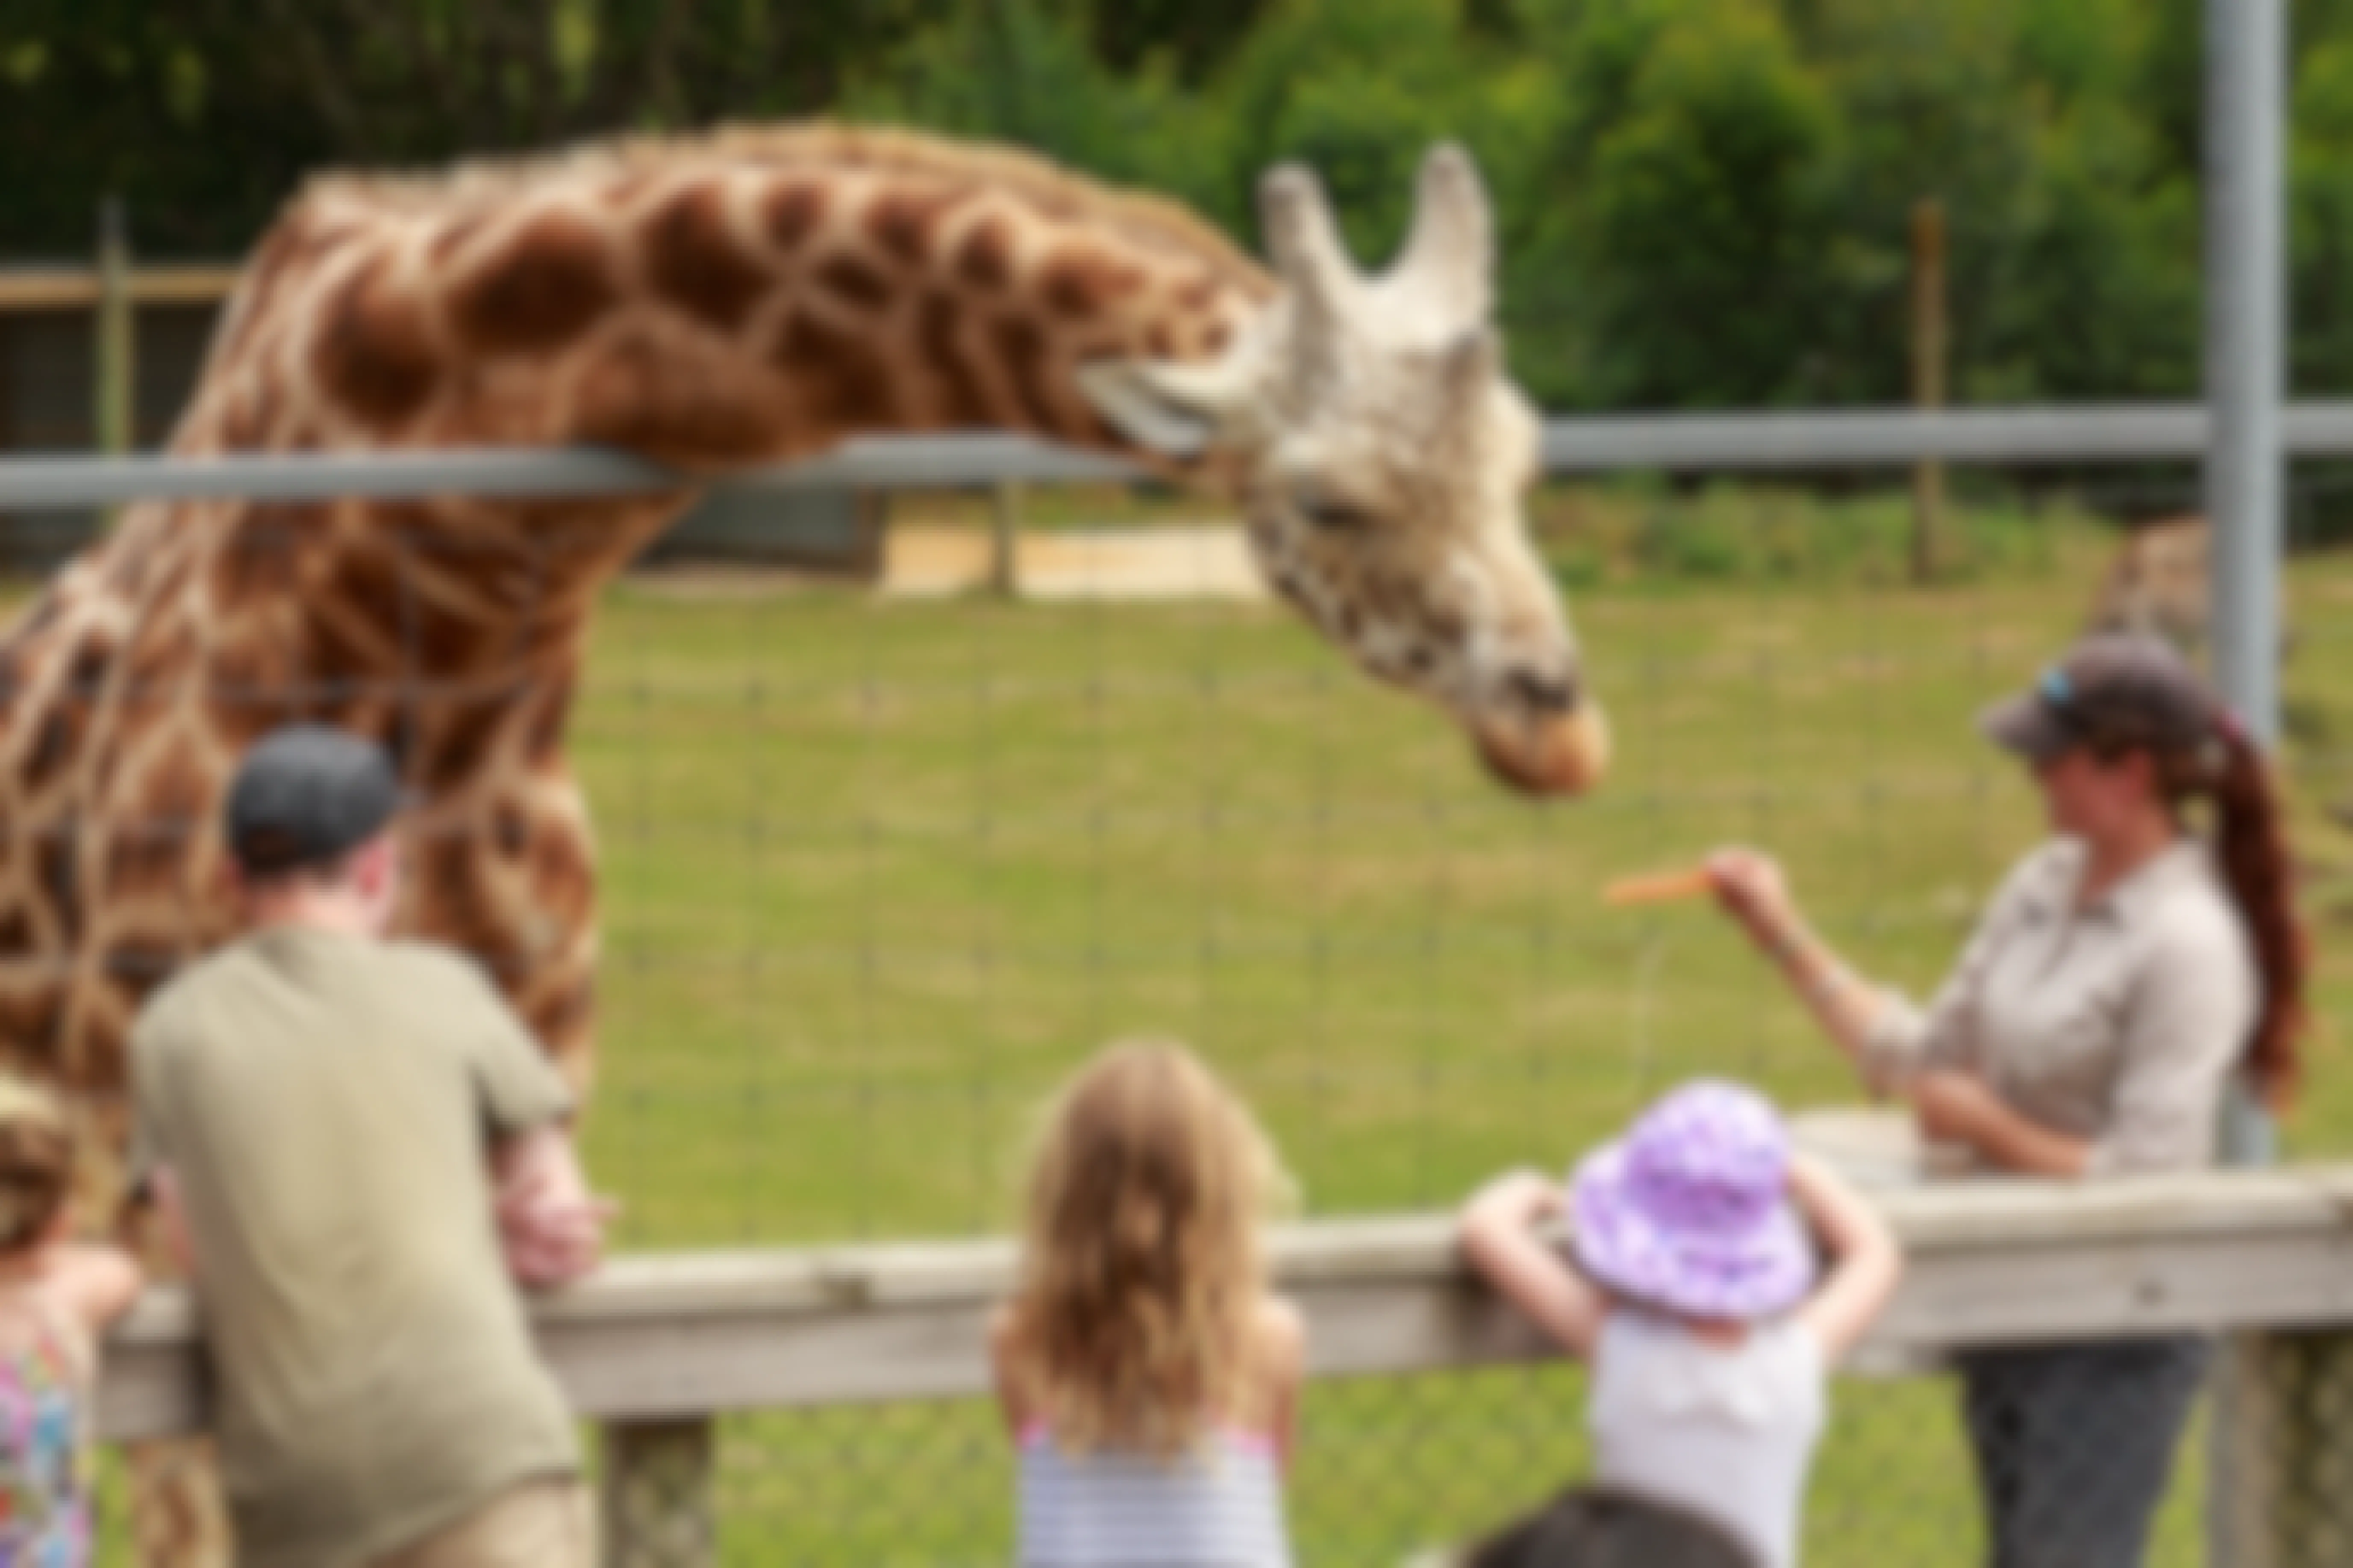 A parent and two children at the zoo, watching a zookeeper feeding a carrot to a giraffe.